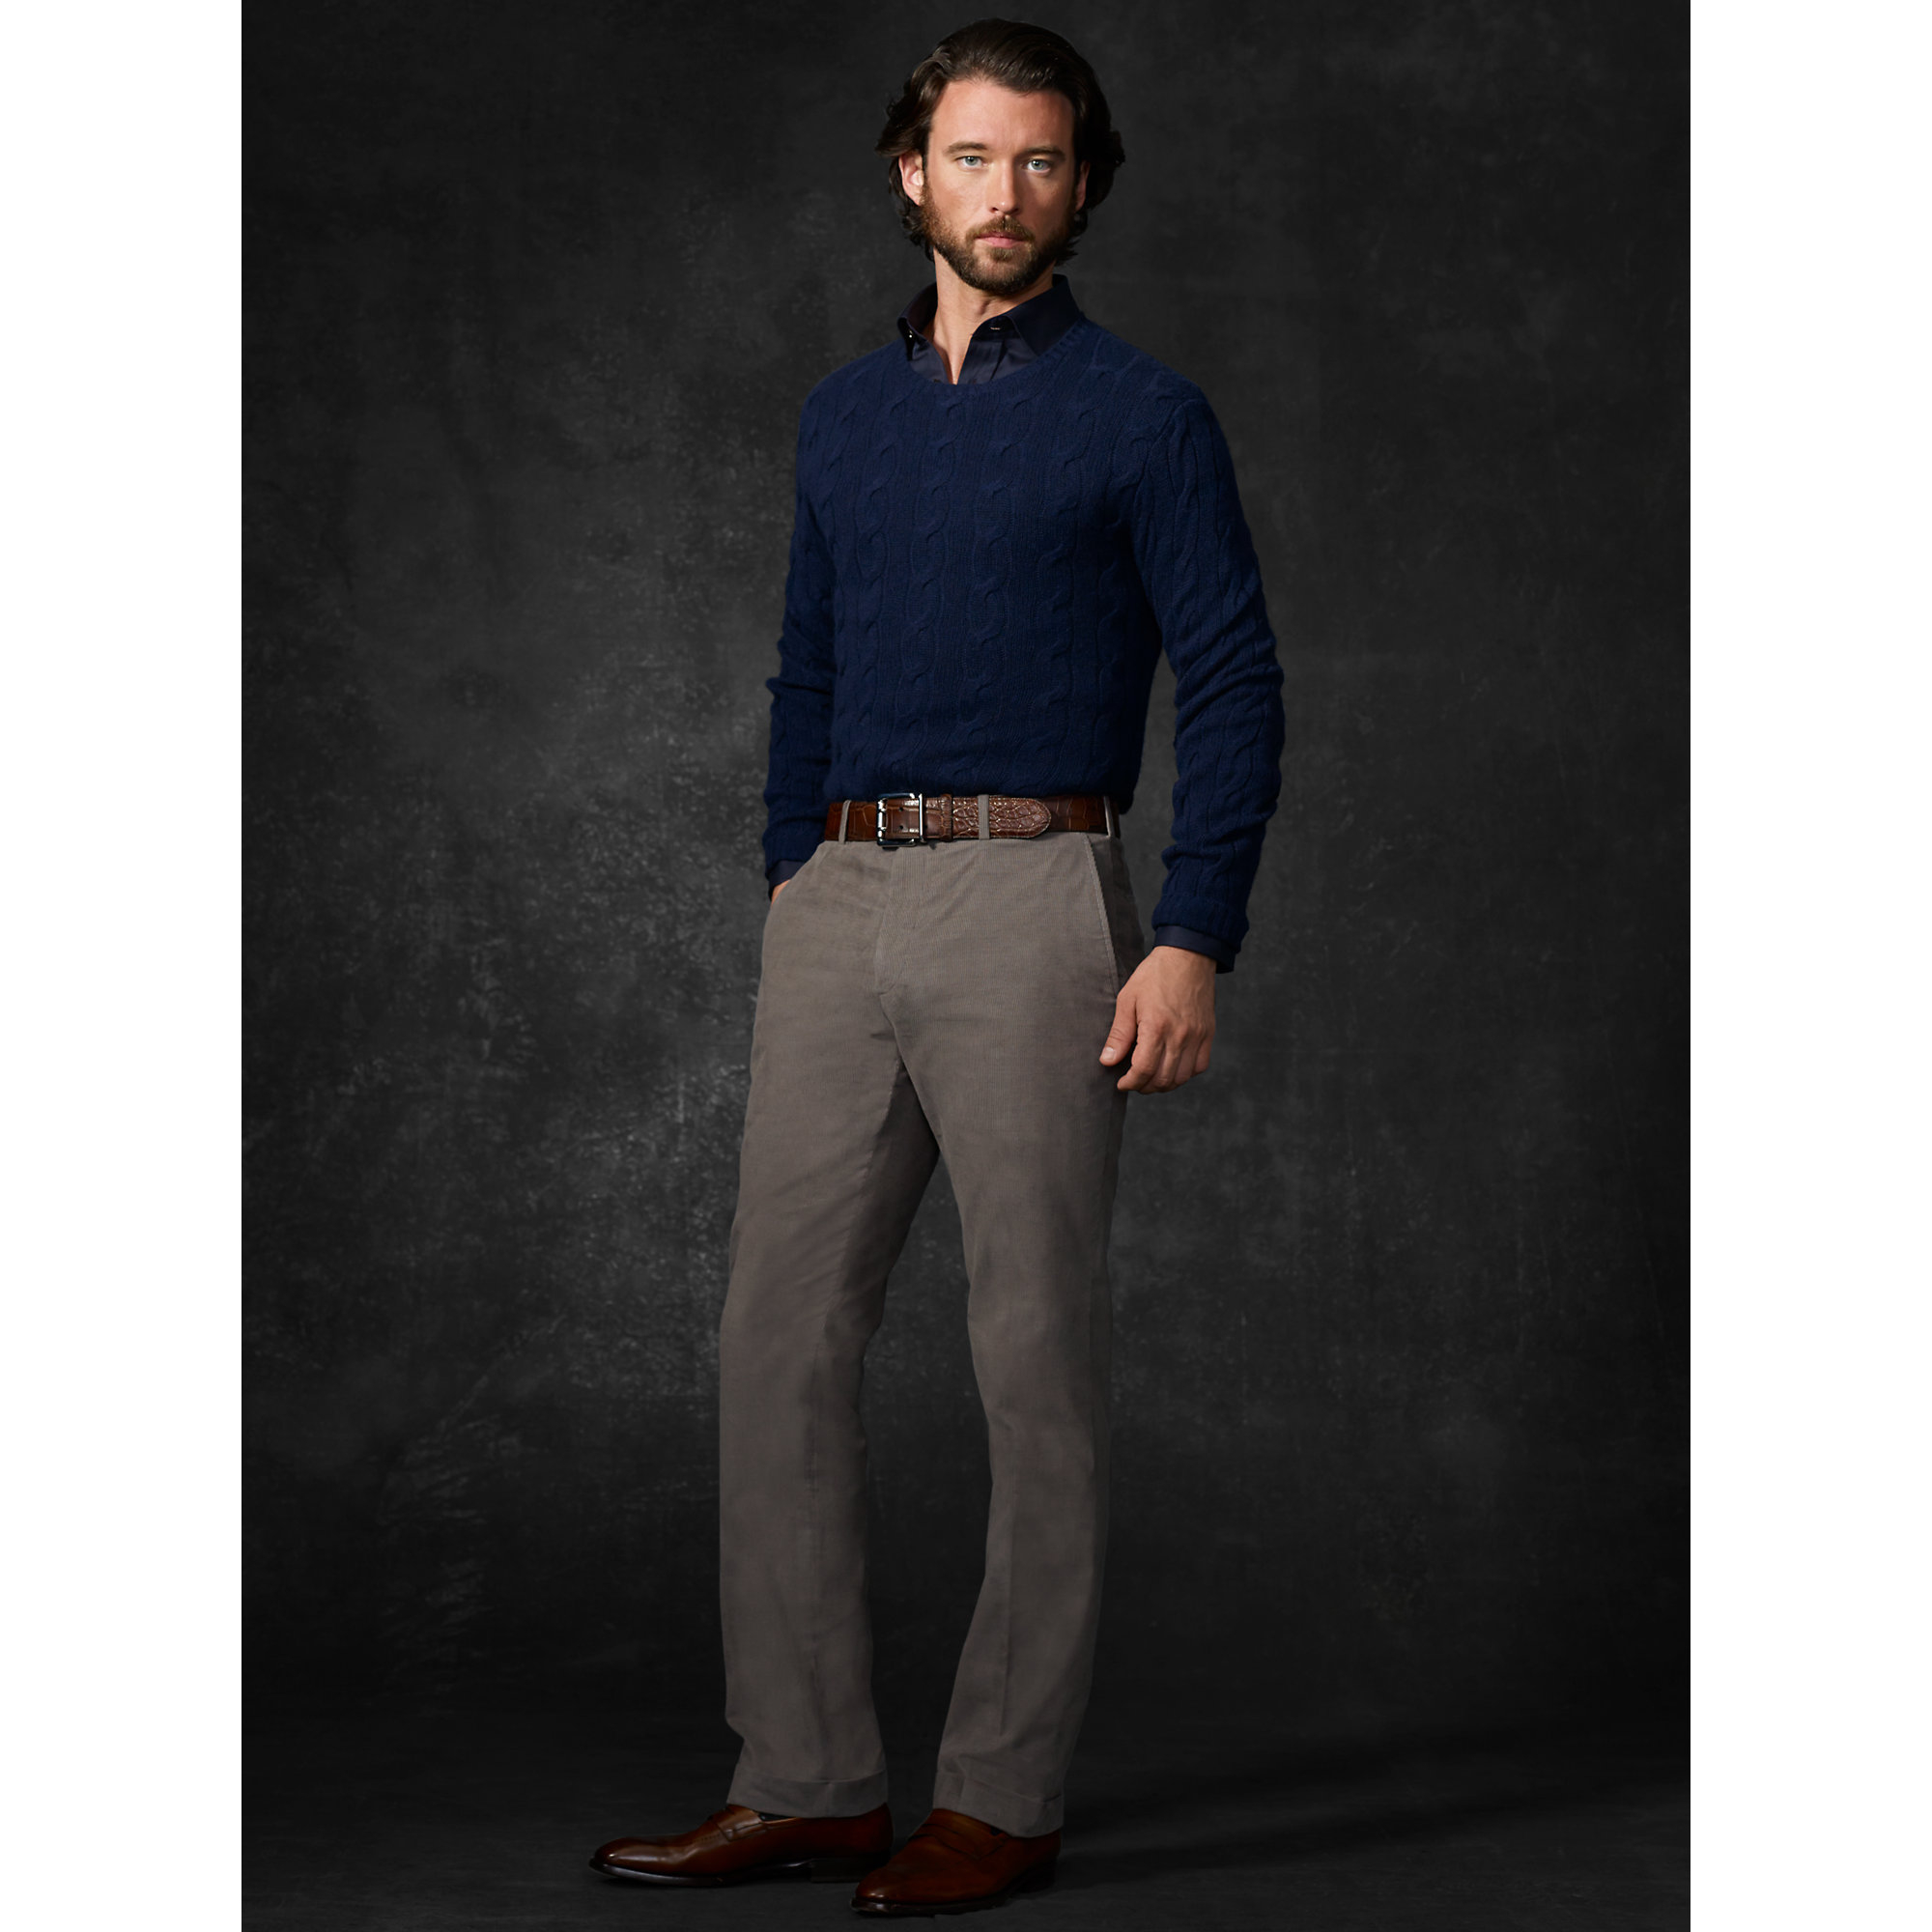 Ralph lauren purple label Cable-Knit Cashmere Sweater in Blue for ...